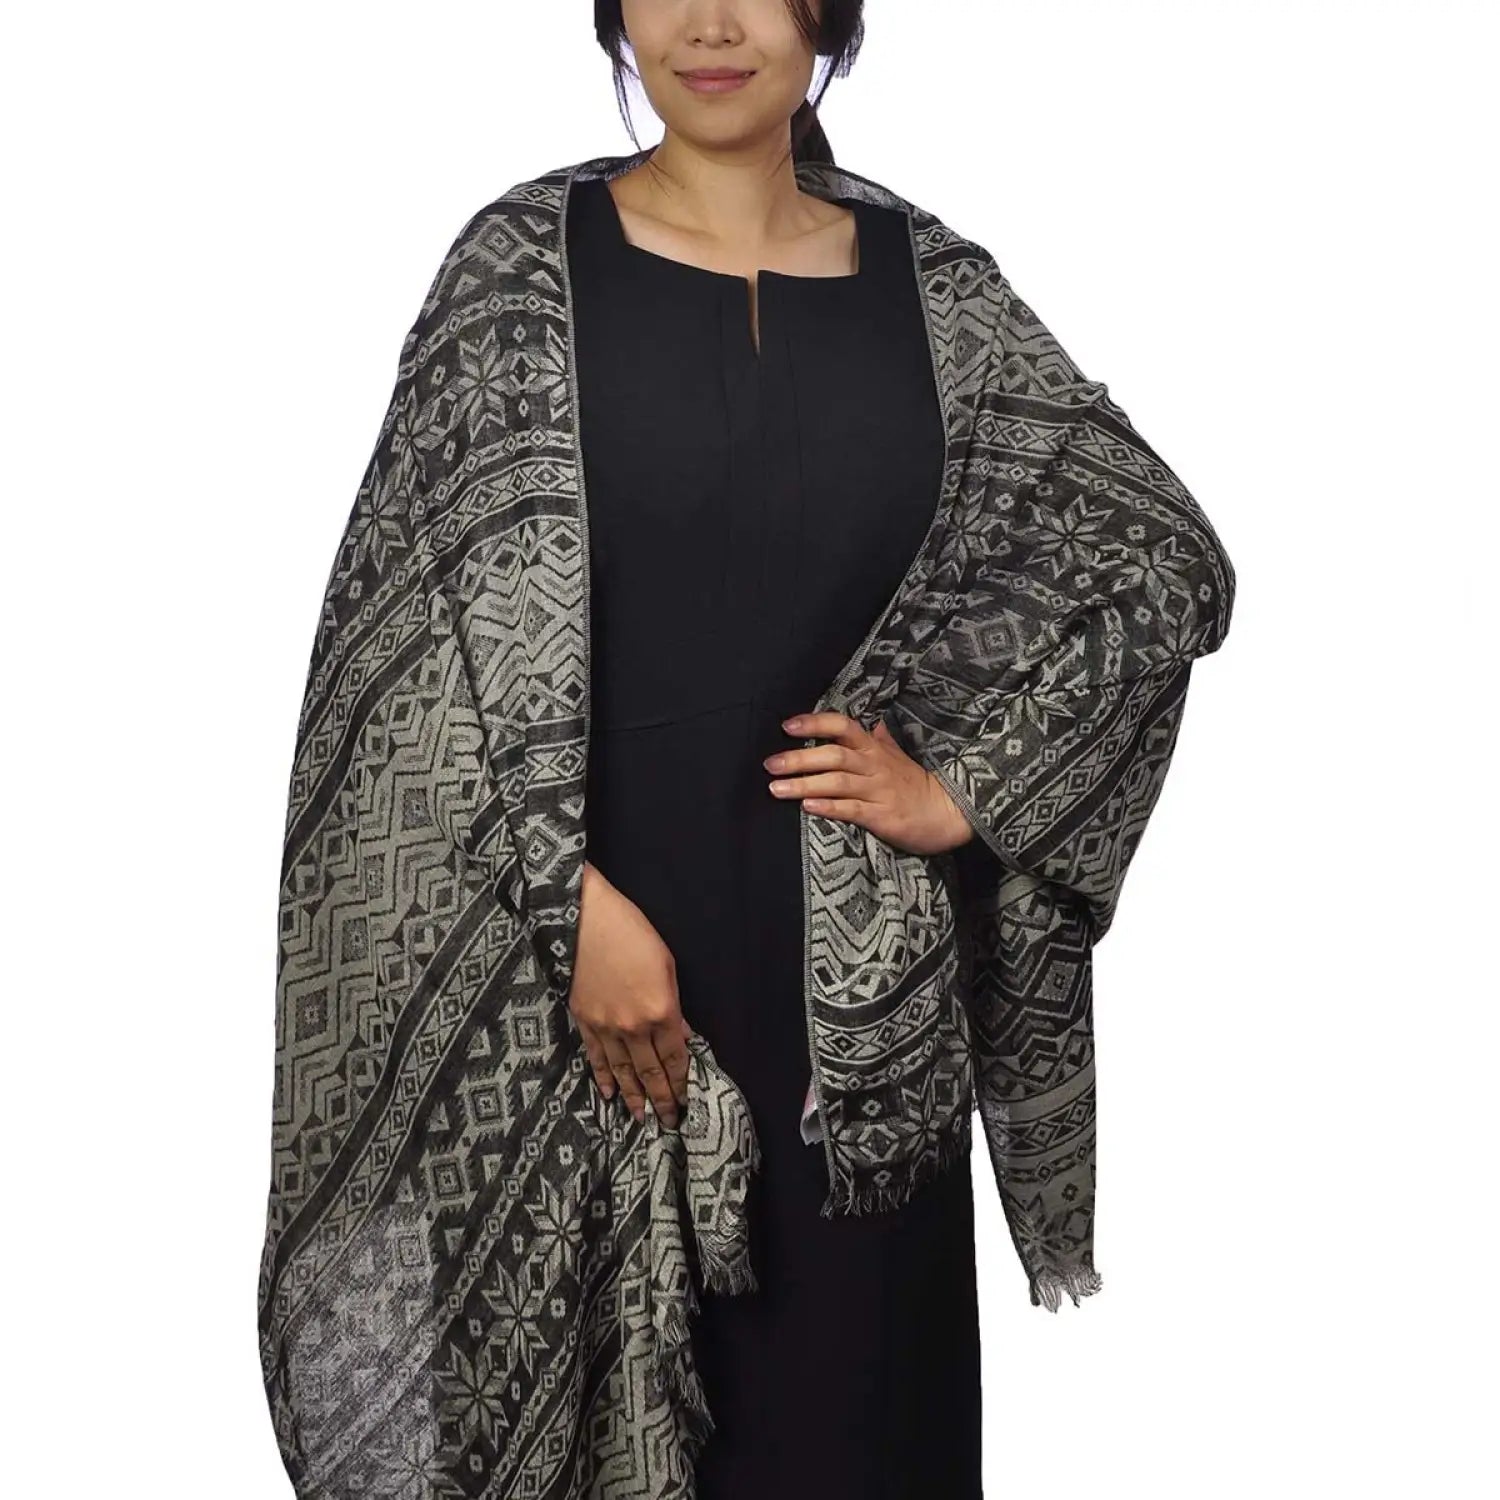 Oversized Aztec patterned shawl scarf worn by woman